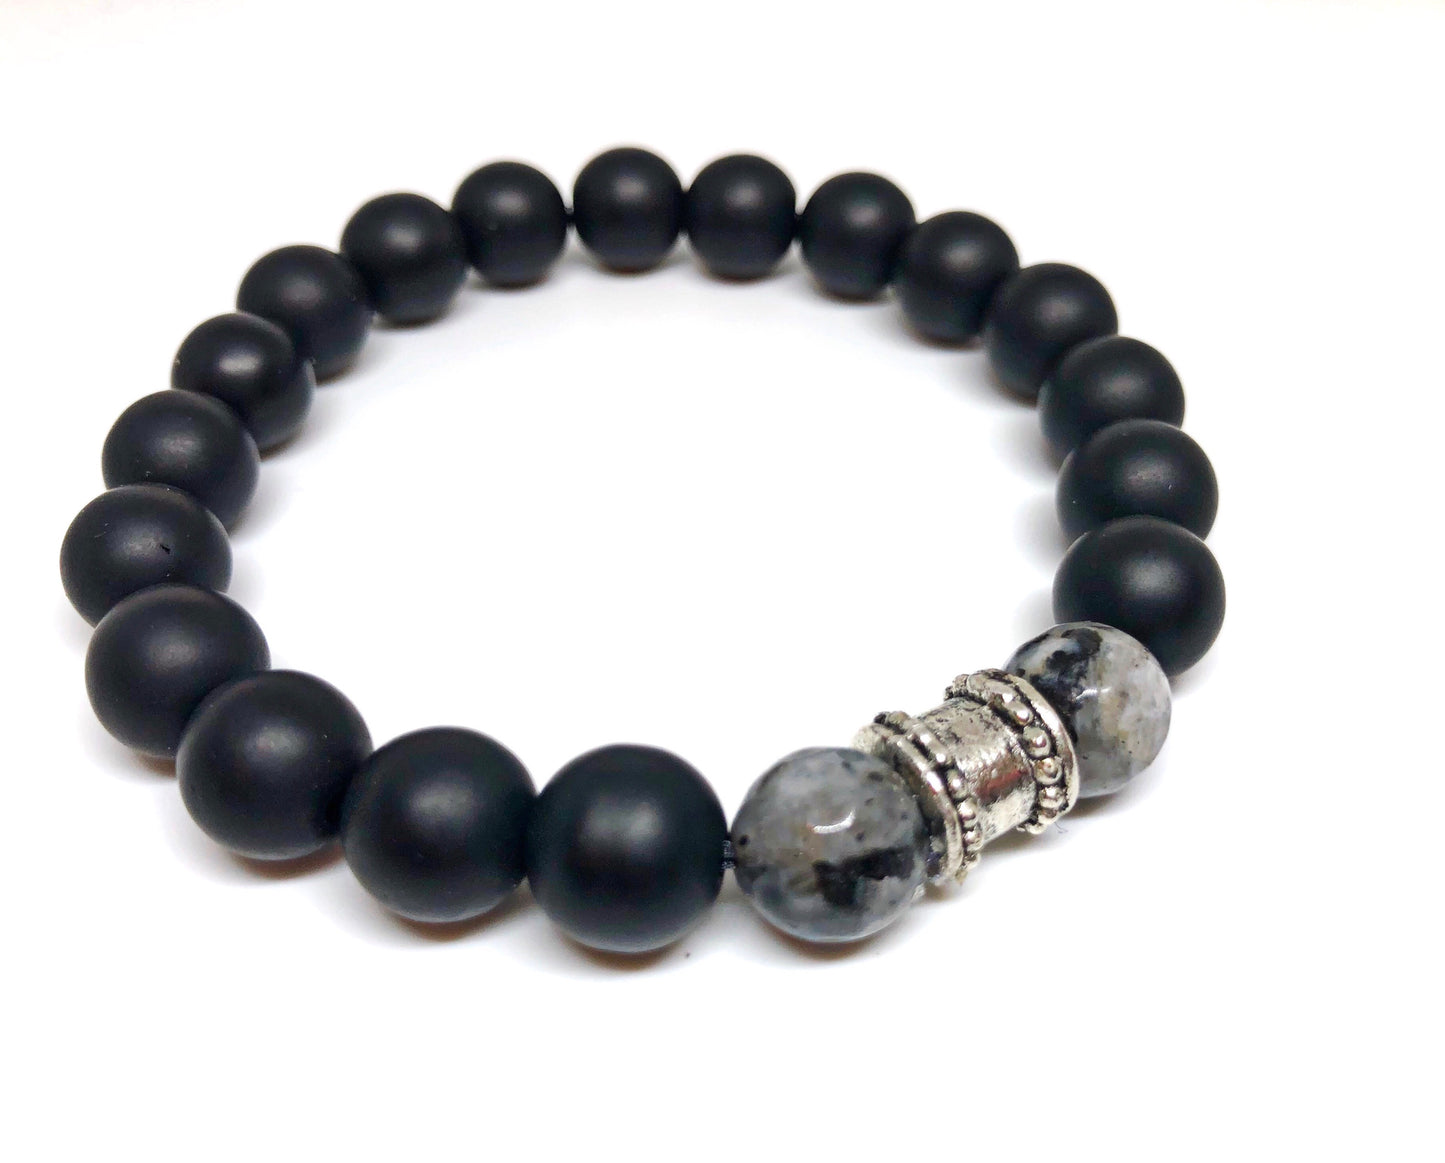 Black Matte Onyx with Faceted Gray Stones